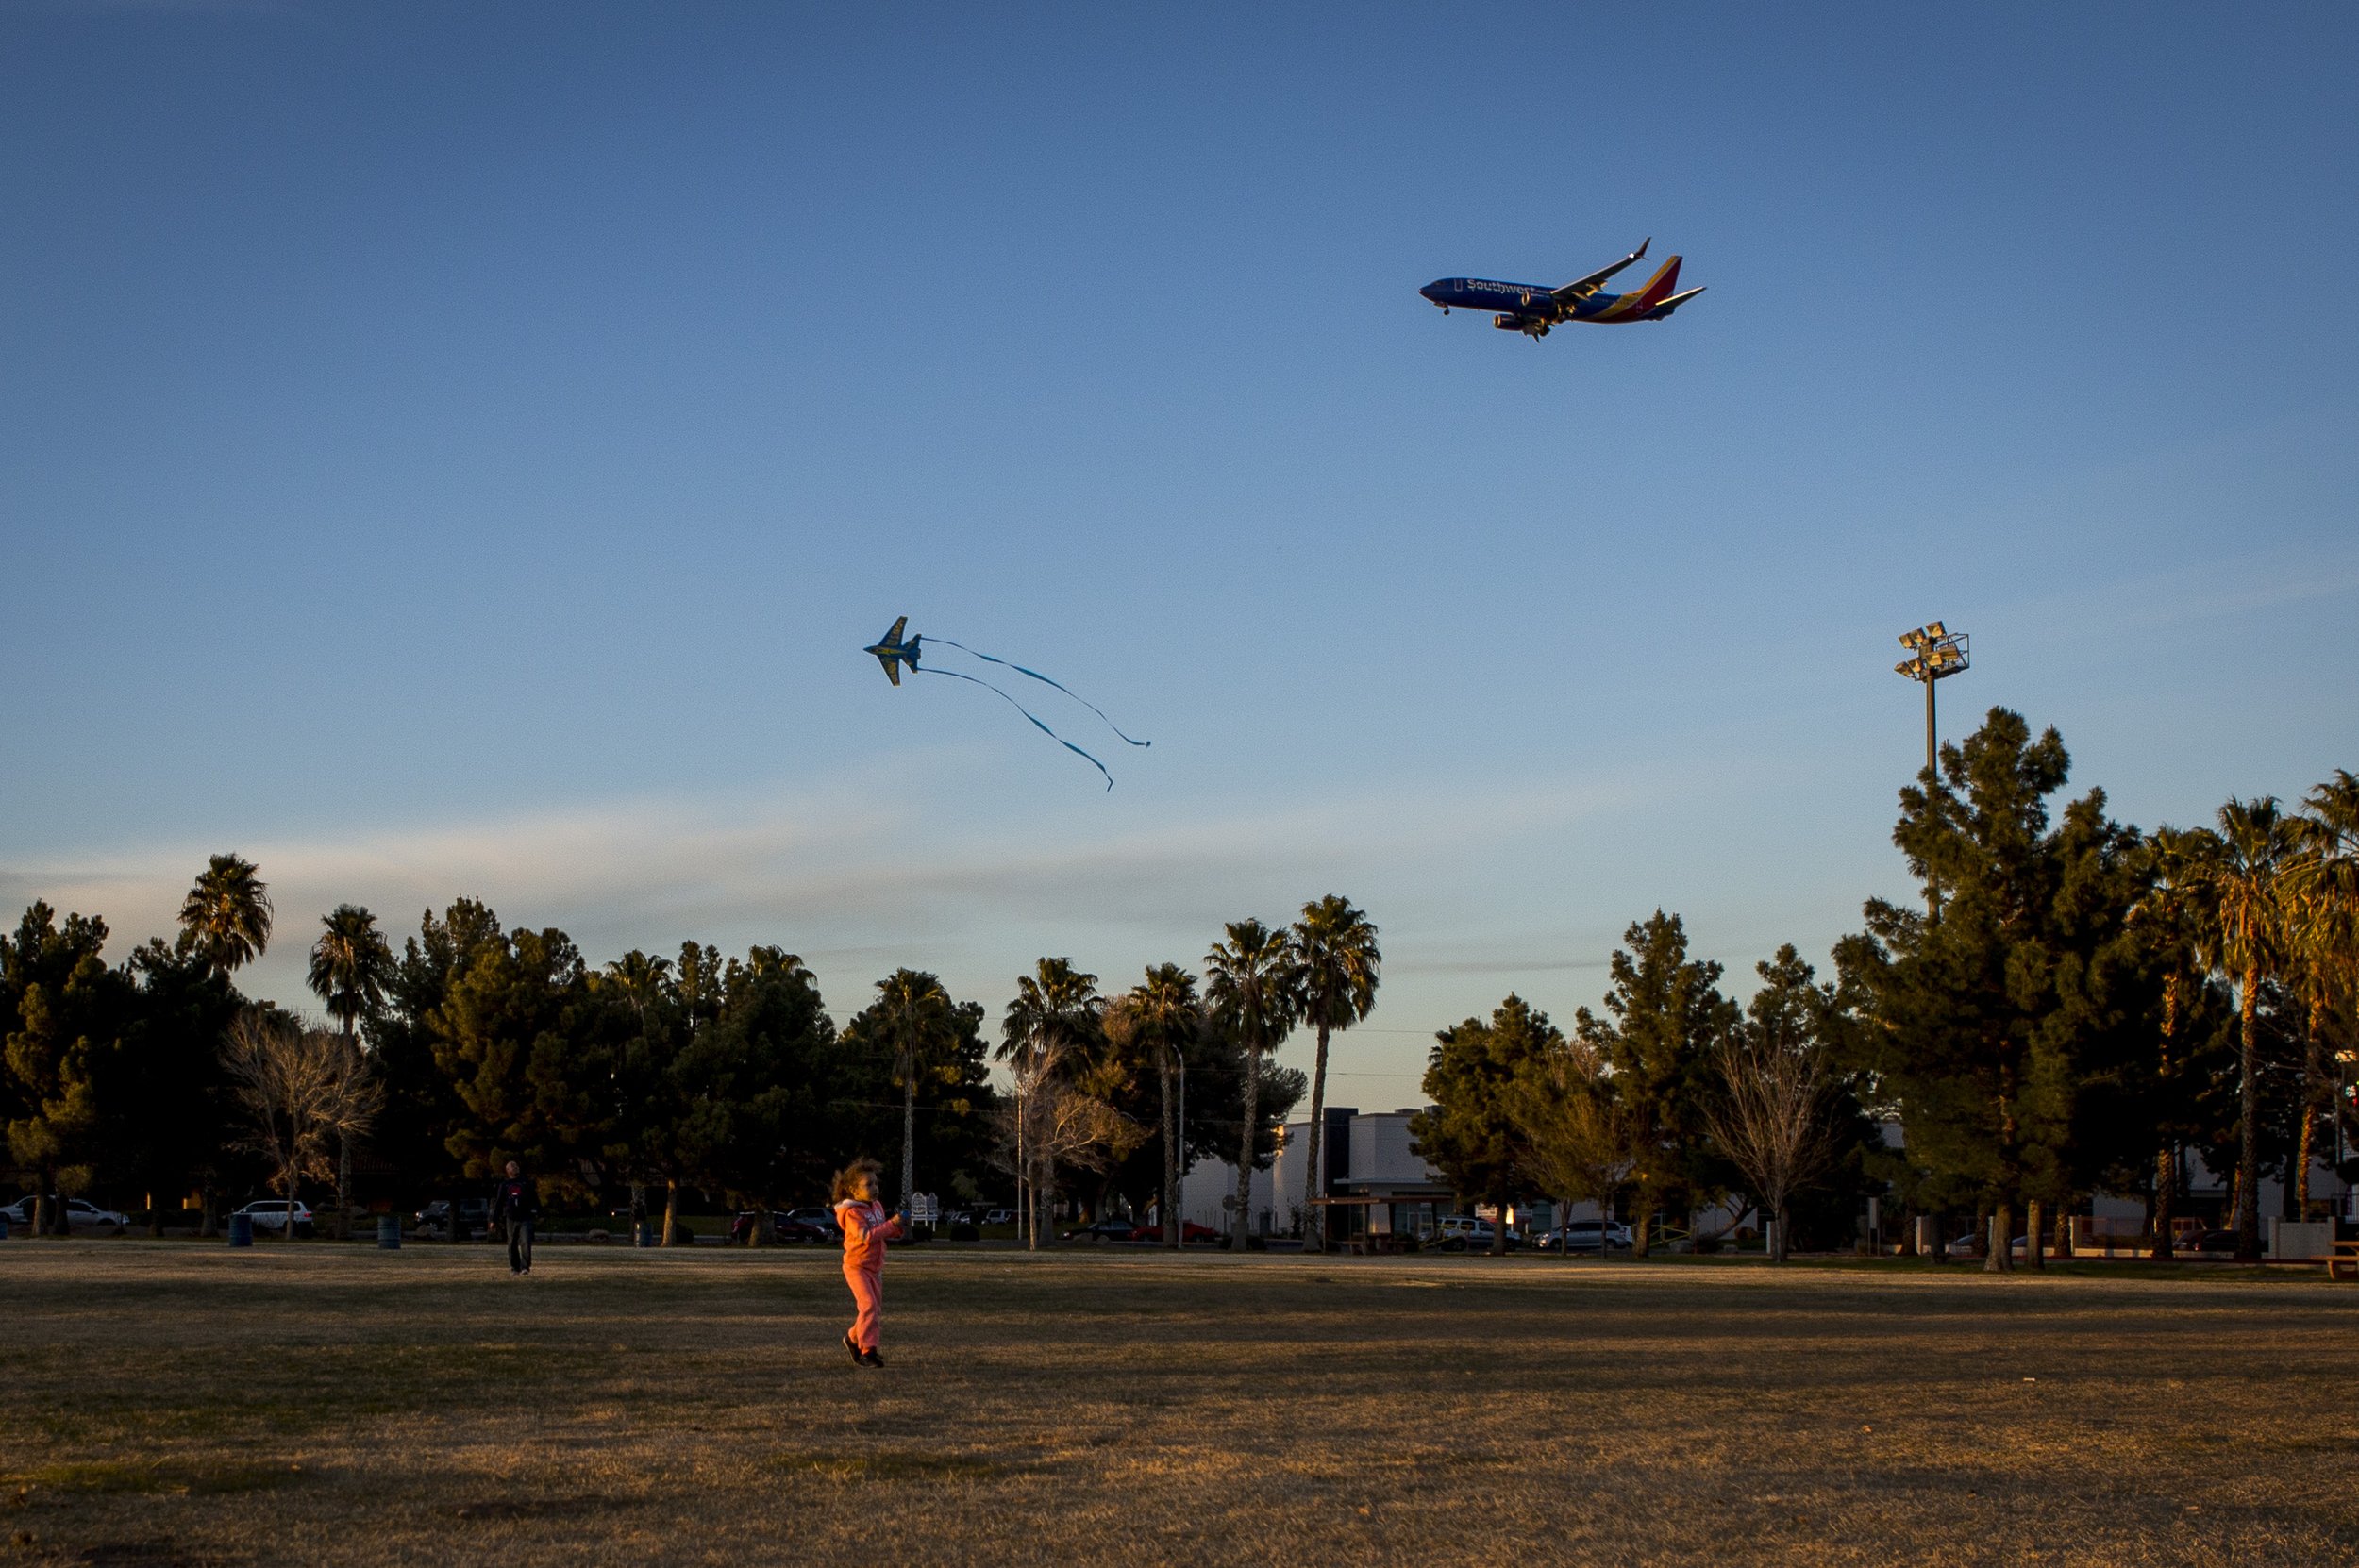  Las Vegas resident Arayah Murray, 5, flies her airplane kite as a real plane flies overhead during a breezy late afternoon in Sunset Park in Las Vegas. 